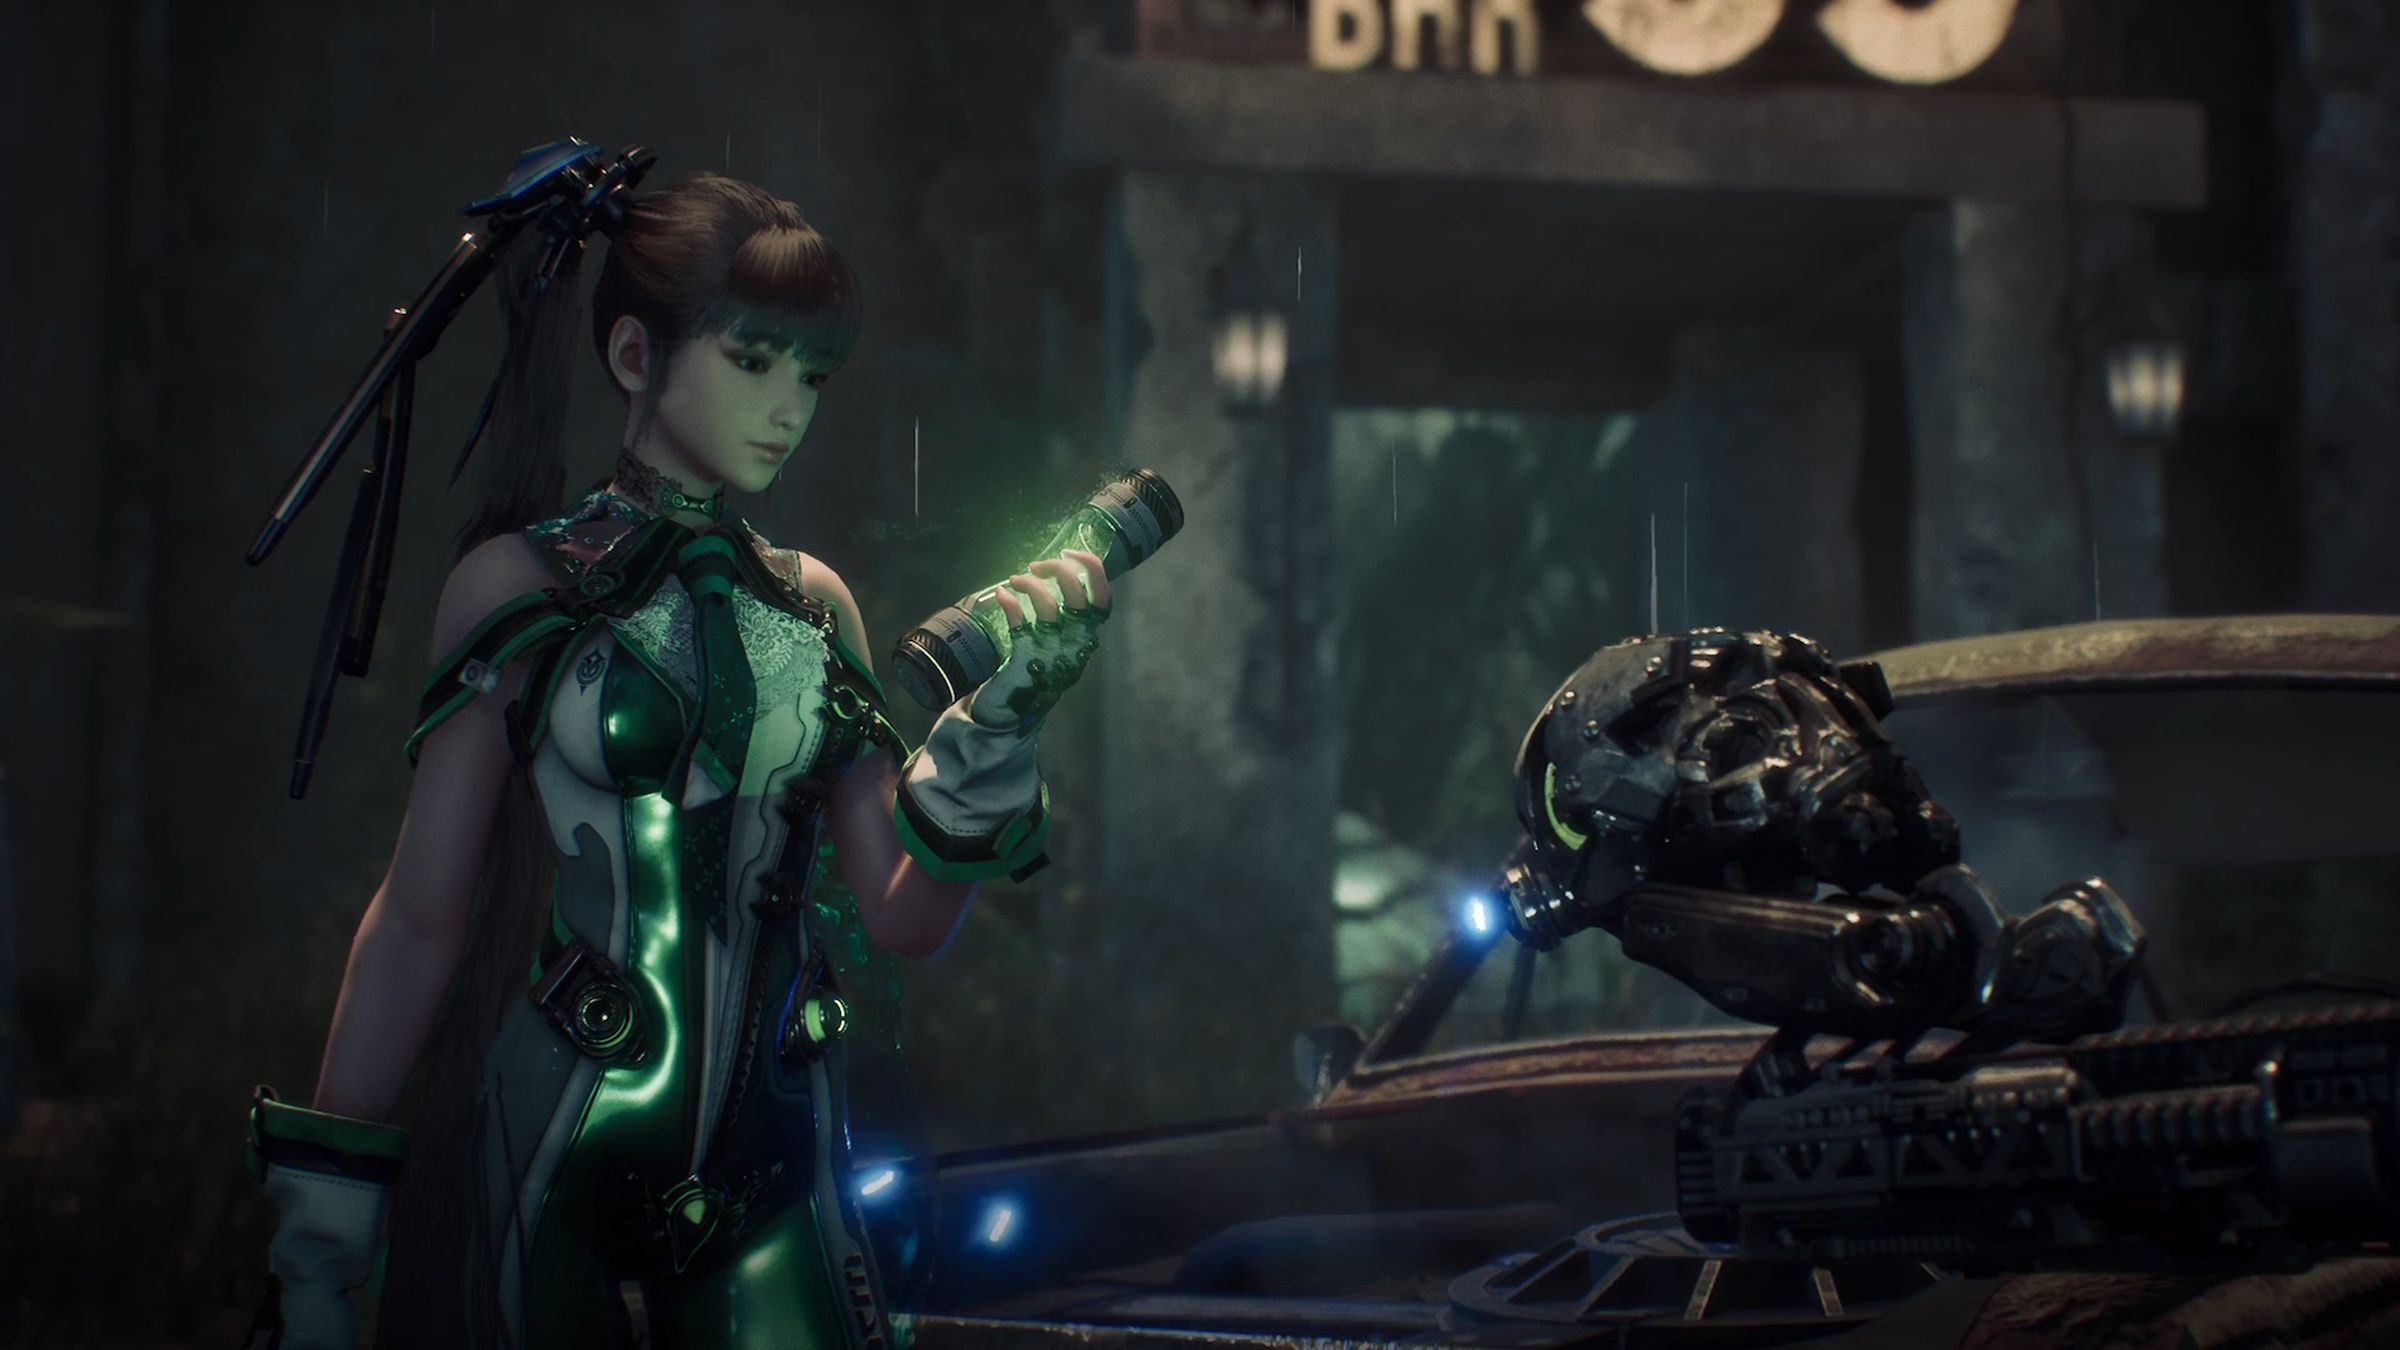 Screenshot from Stellar Blade featuring Eve holding a small green device called a hyper cell.